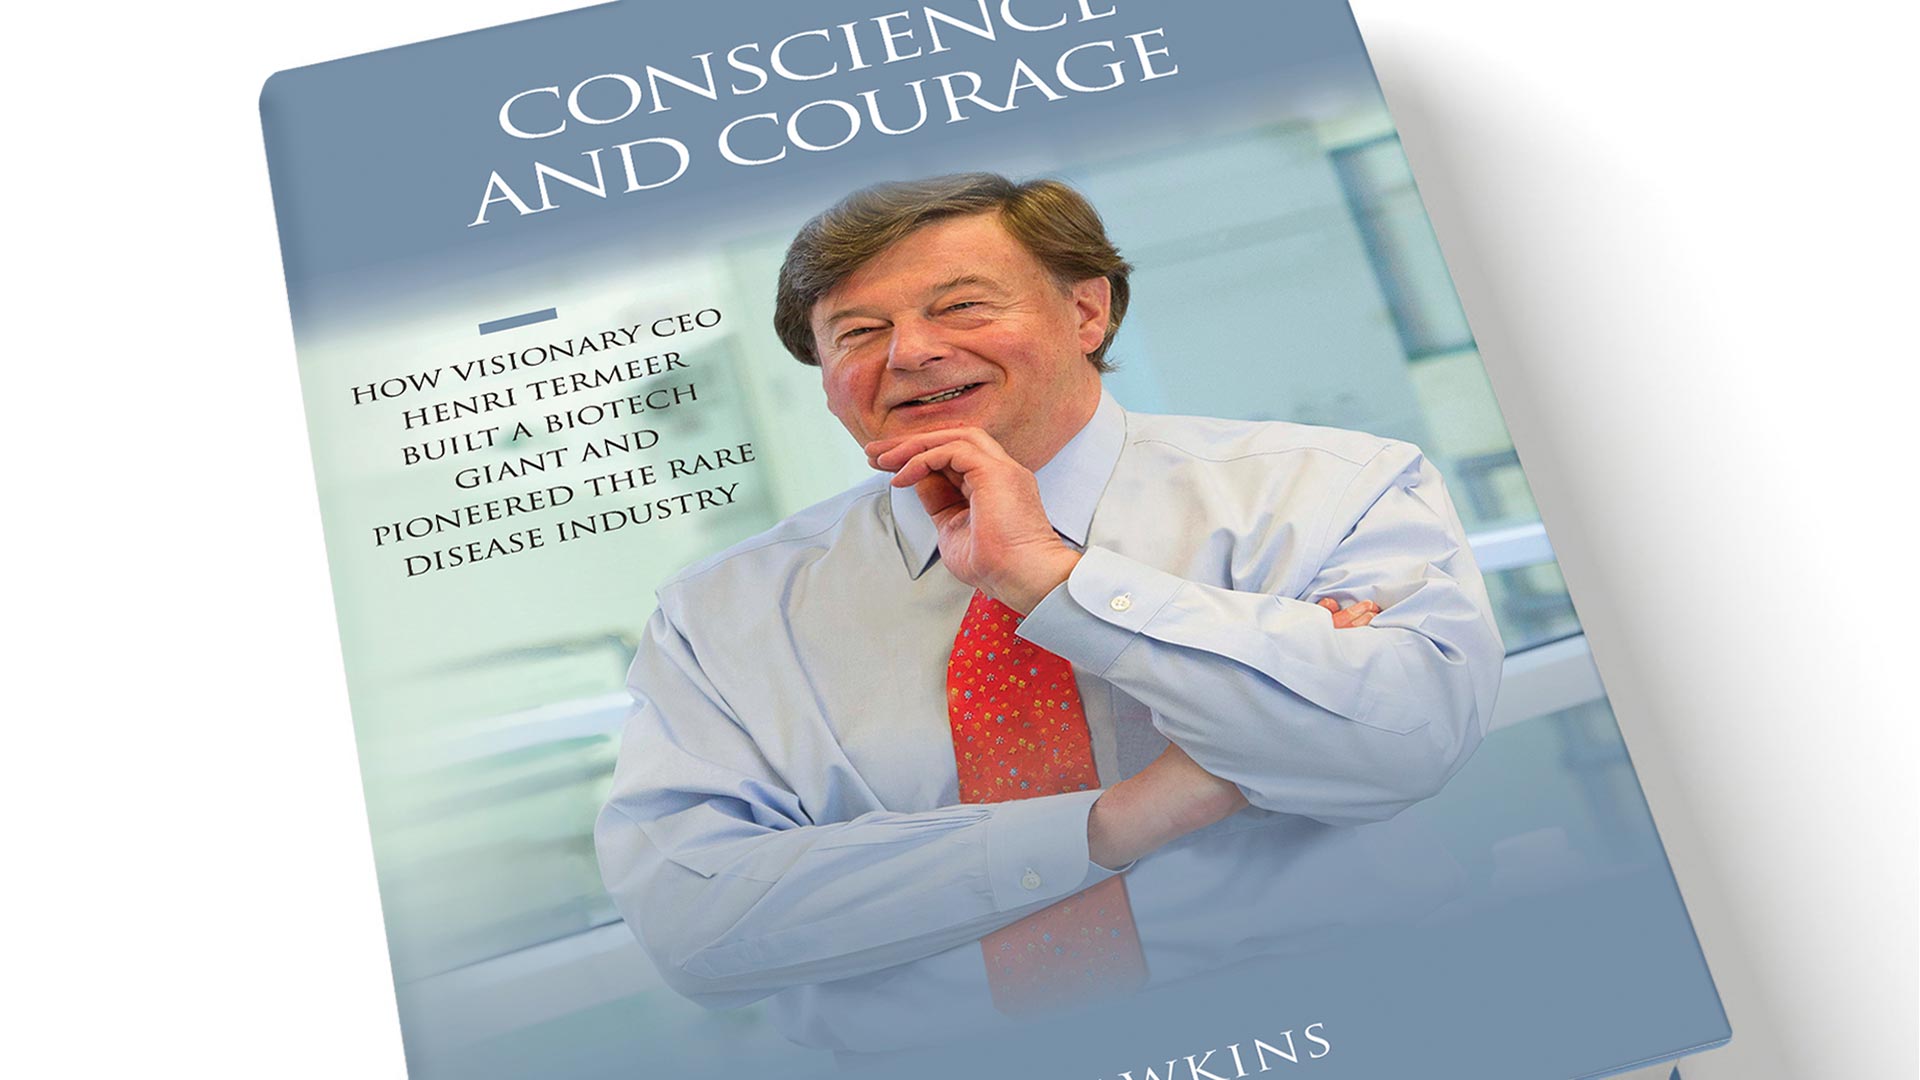 image of Conscience and Courage book by John Hawkins